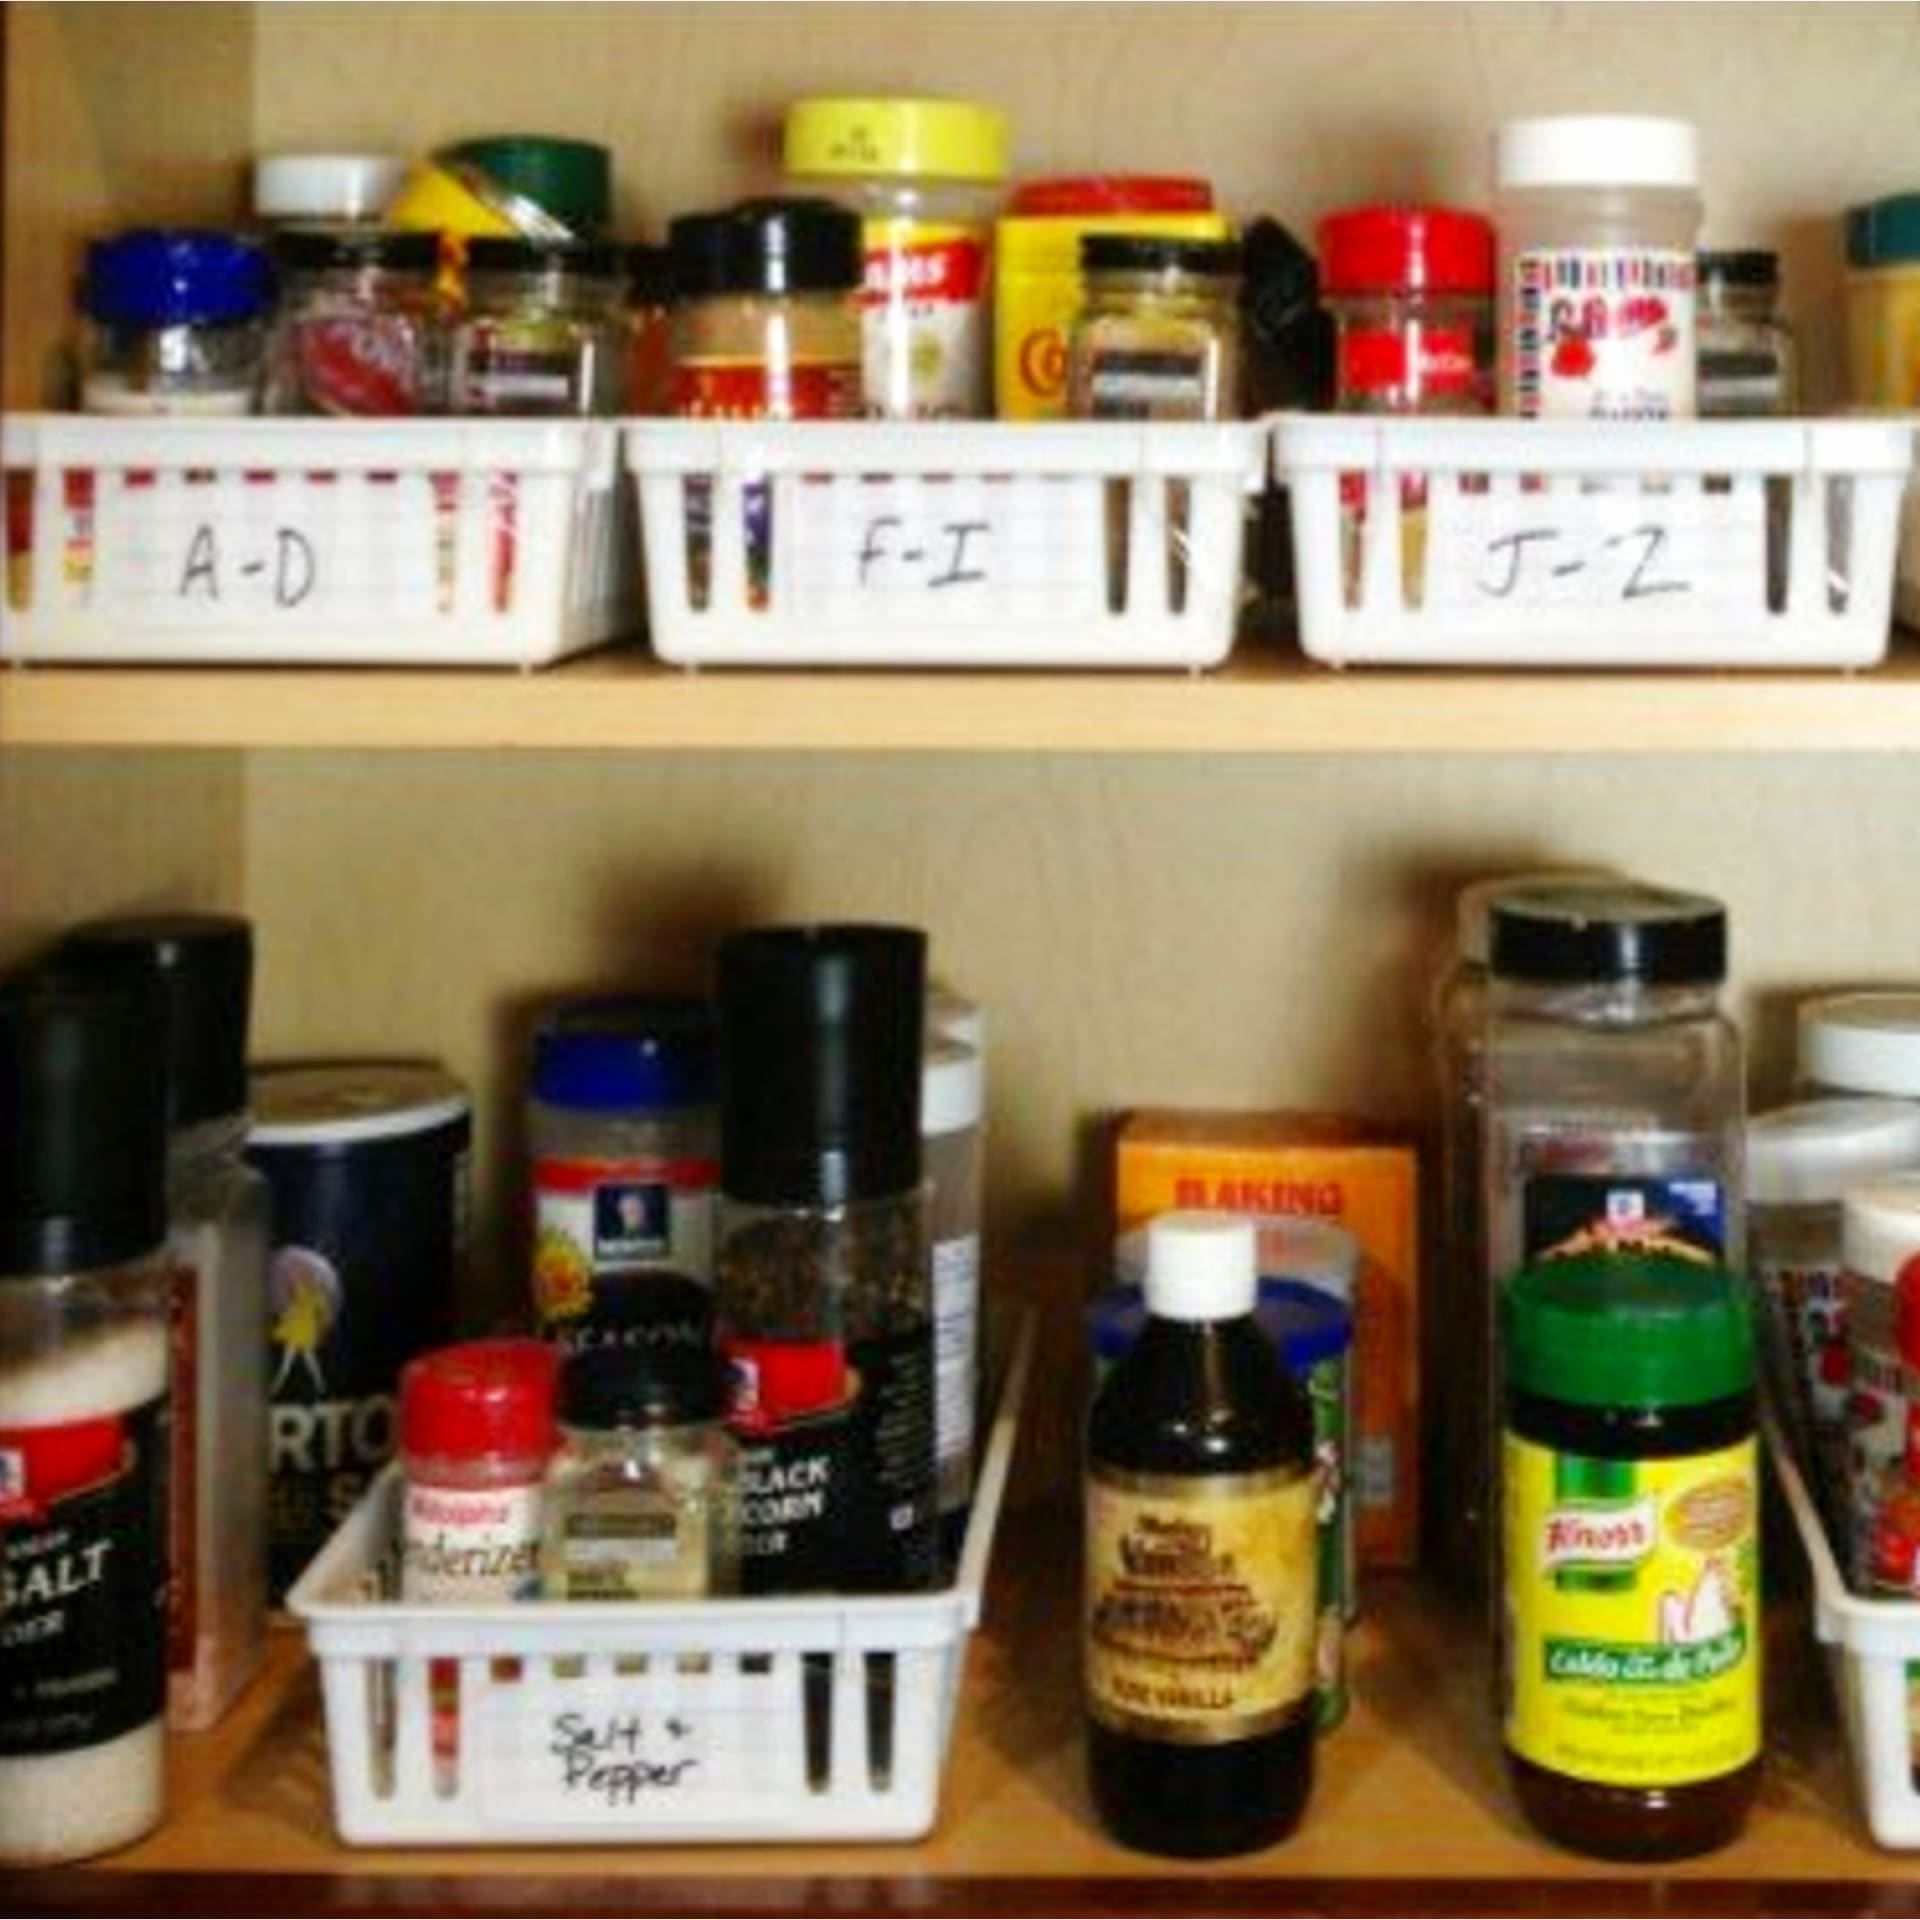 Kitchen organization on a budget - cheap ways to organize inside kitchen cabinets and declutter spices - cheap ways to organize kitchen with dollar stores organizing ideas